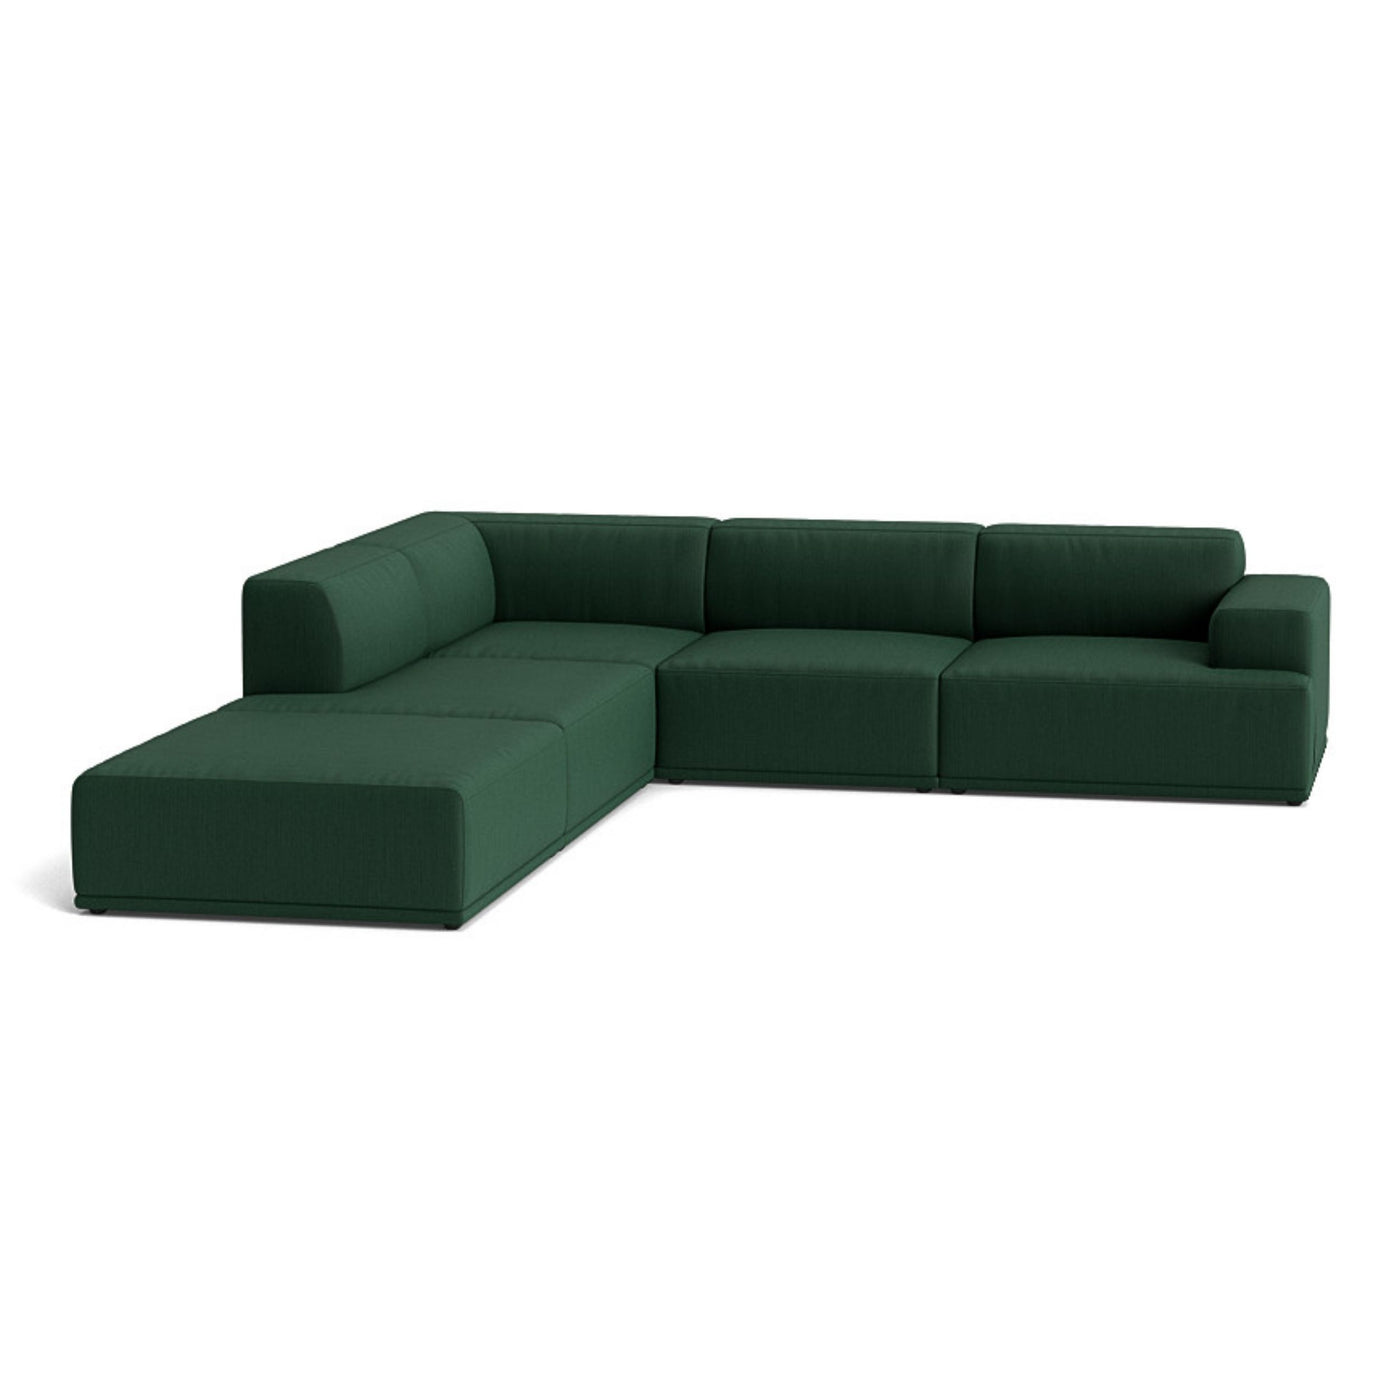 Muuto Connect Soft Modular Corner Sofa, configuration 1. Made-to-order from someday designs. #colour_balder-982